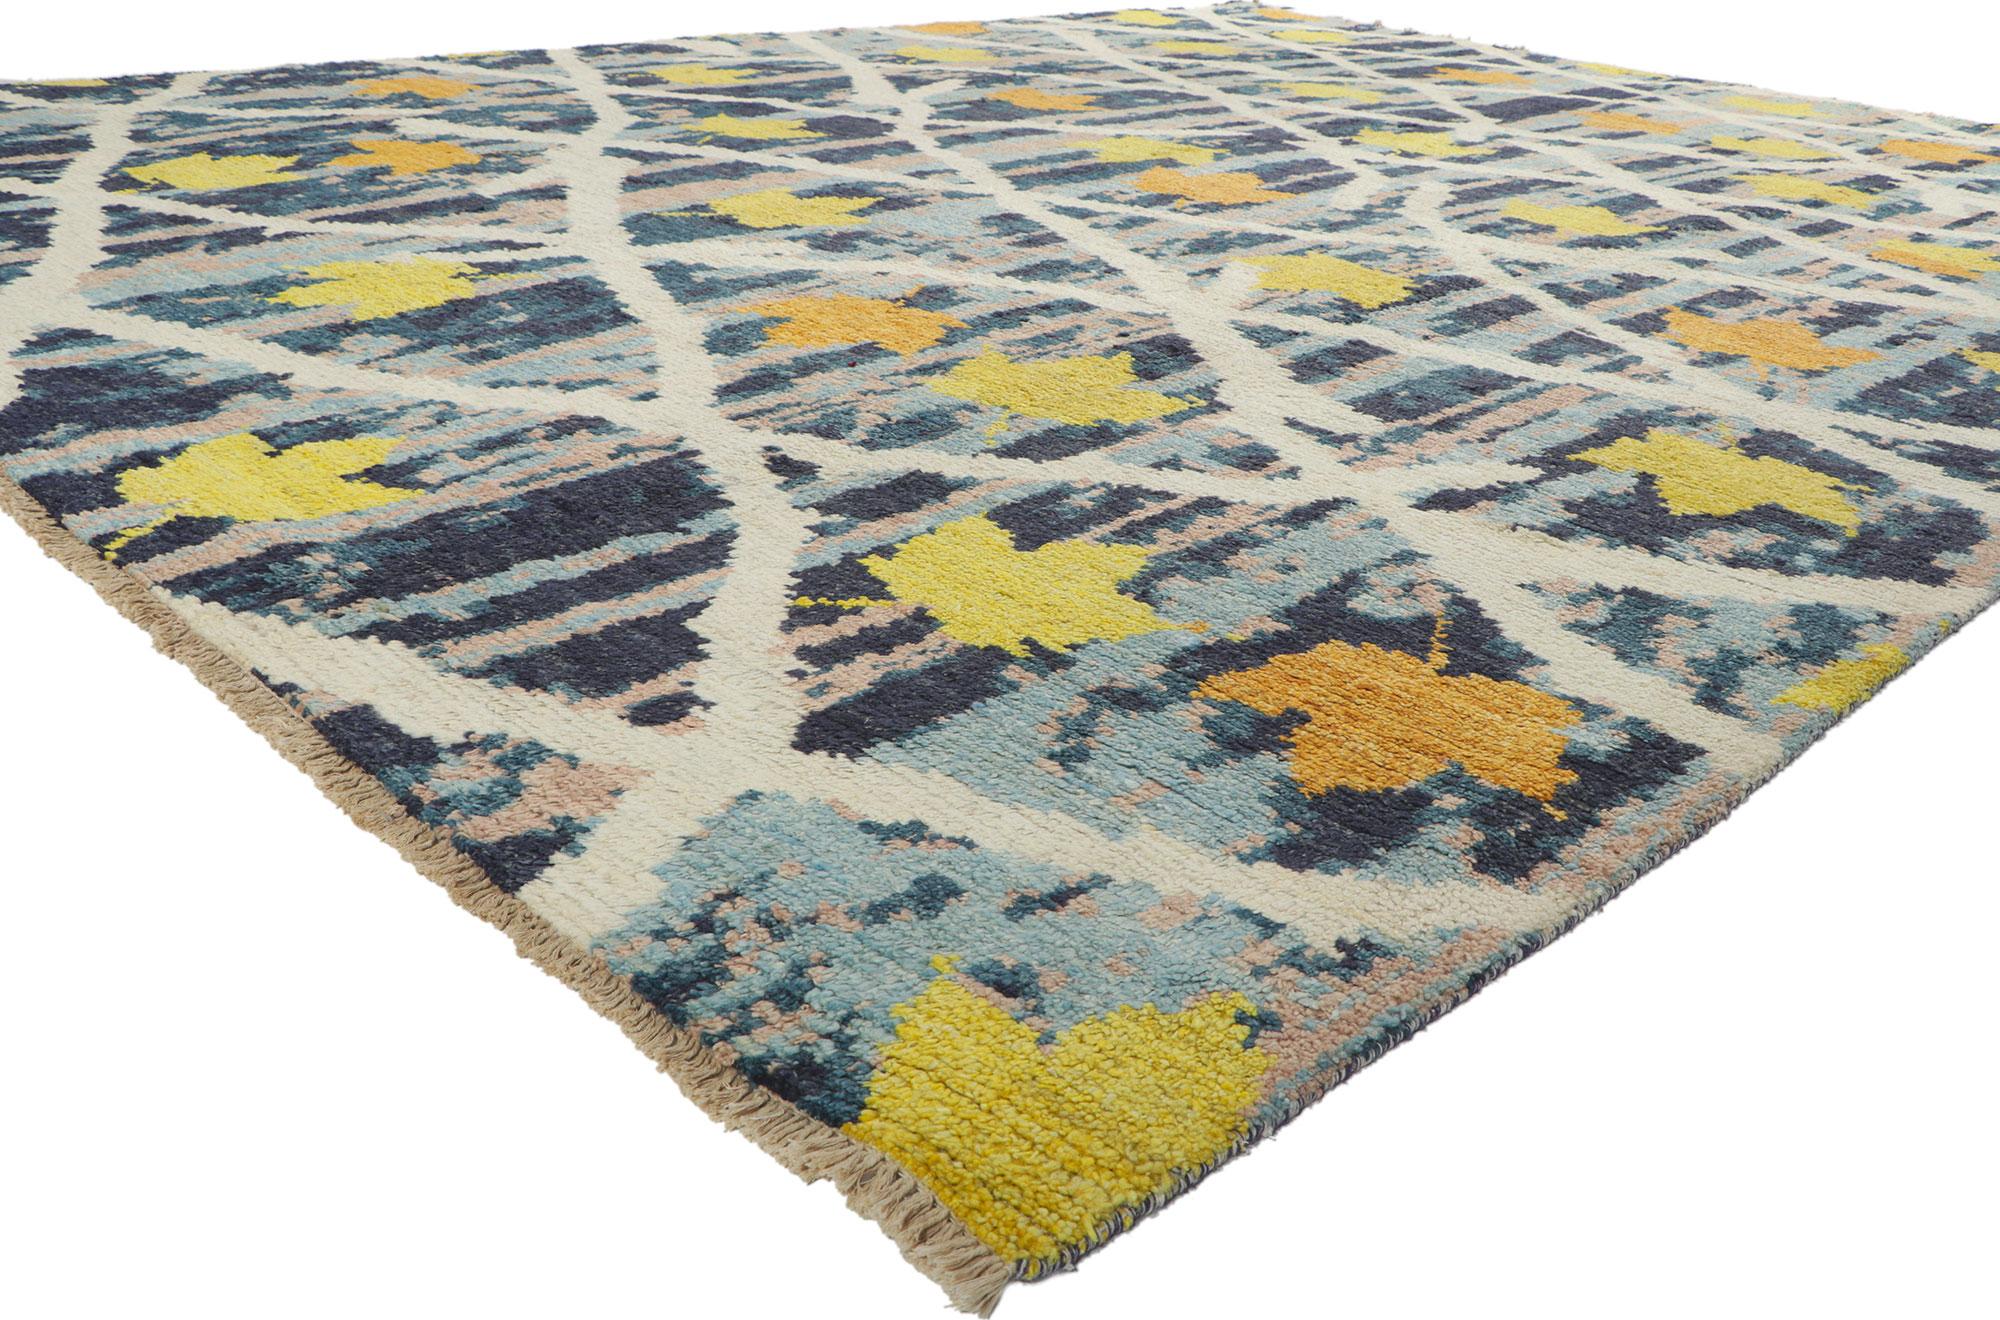 80366 New Abstract Moroccan Area Rug, 10'05 x 13'07. Emanating autumn in the Italian Alps with incredible detail and texture, this hand knotted Moroccan area rug is a captivating vision of woven beauty. The eye-catching Biophilic Design and modern